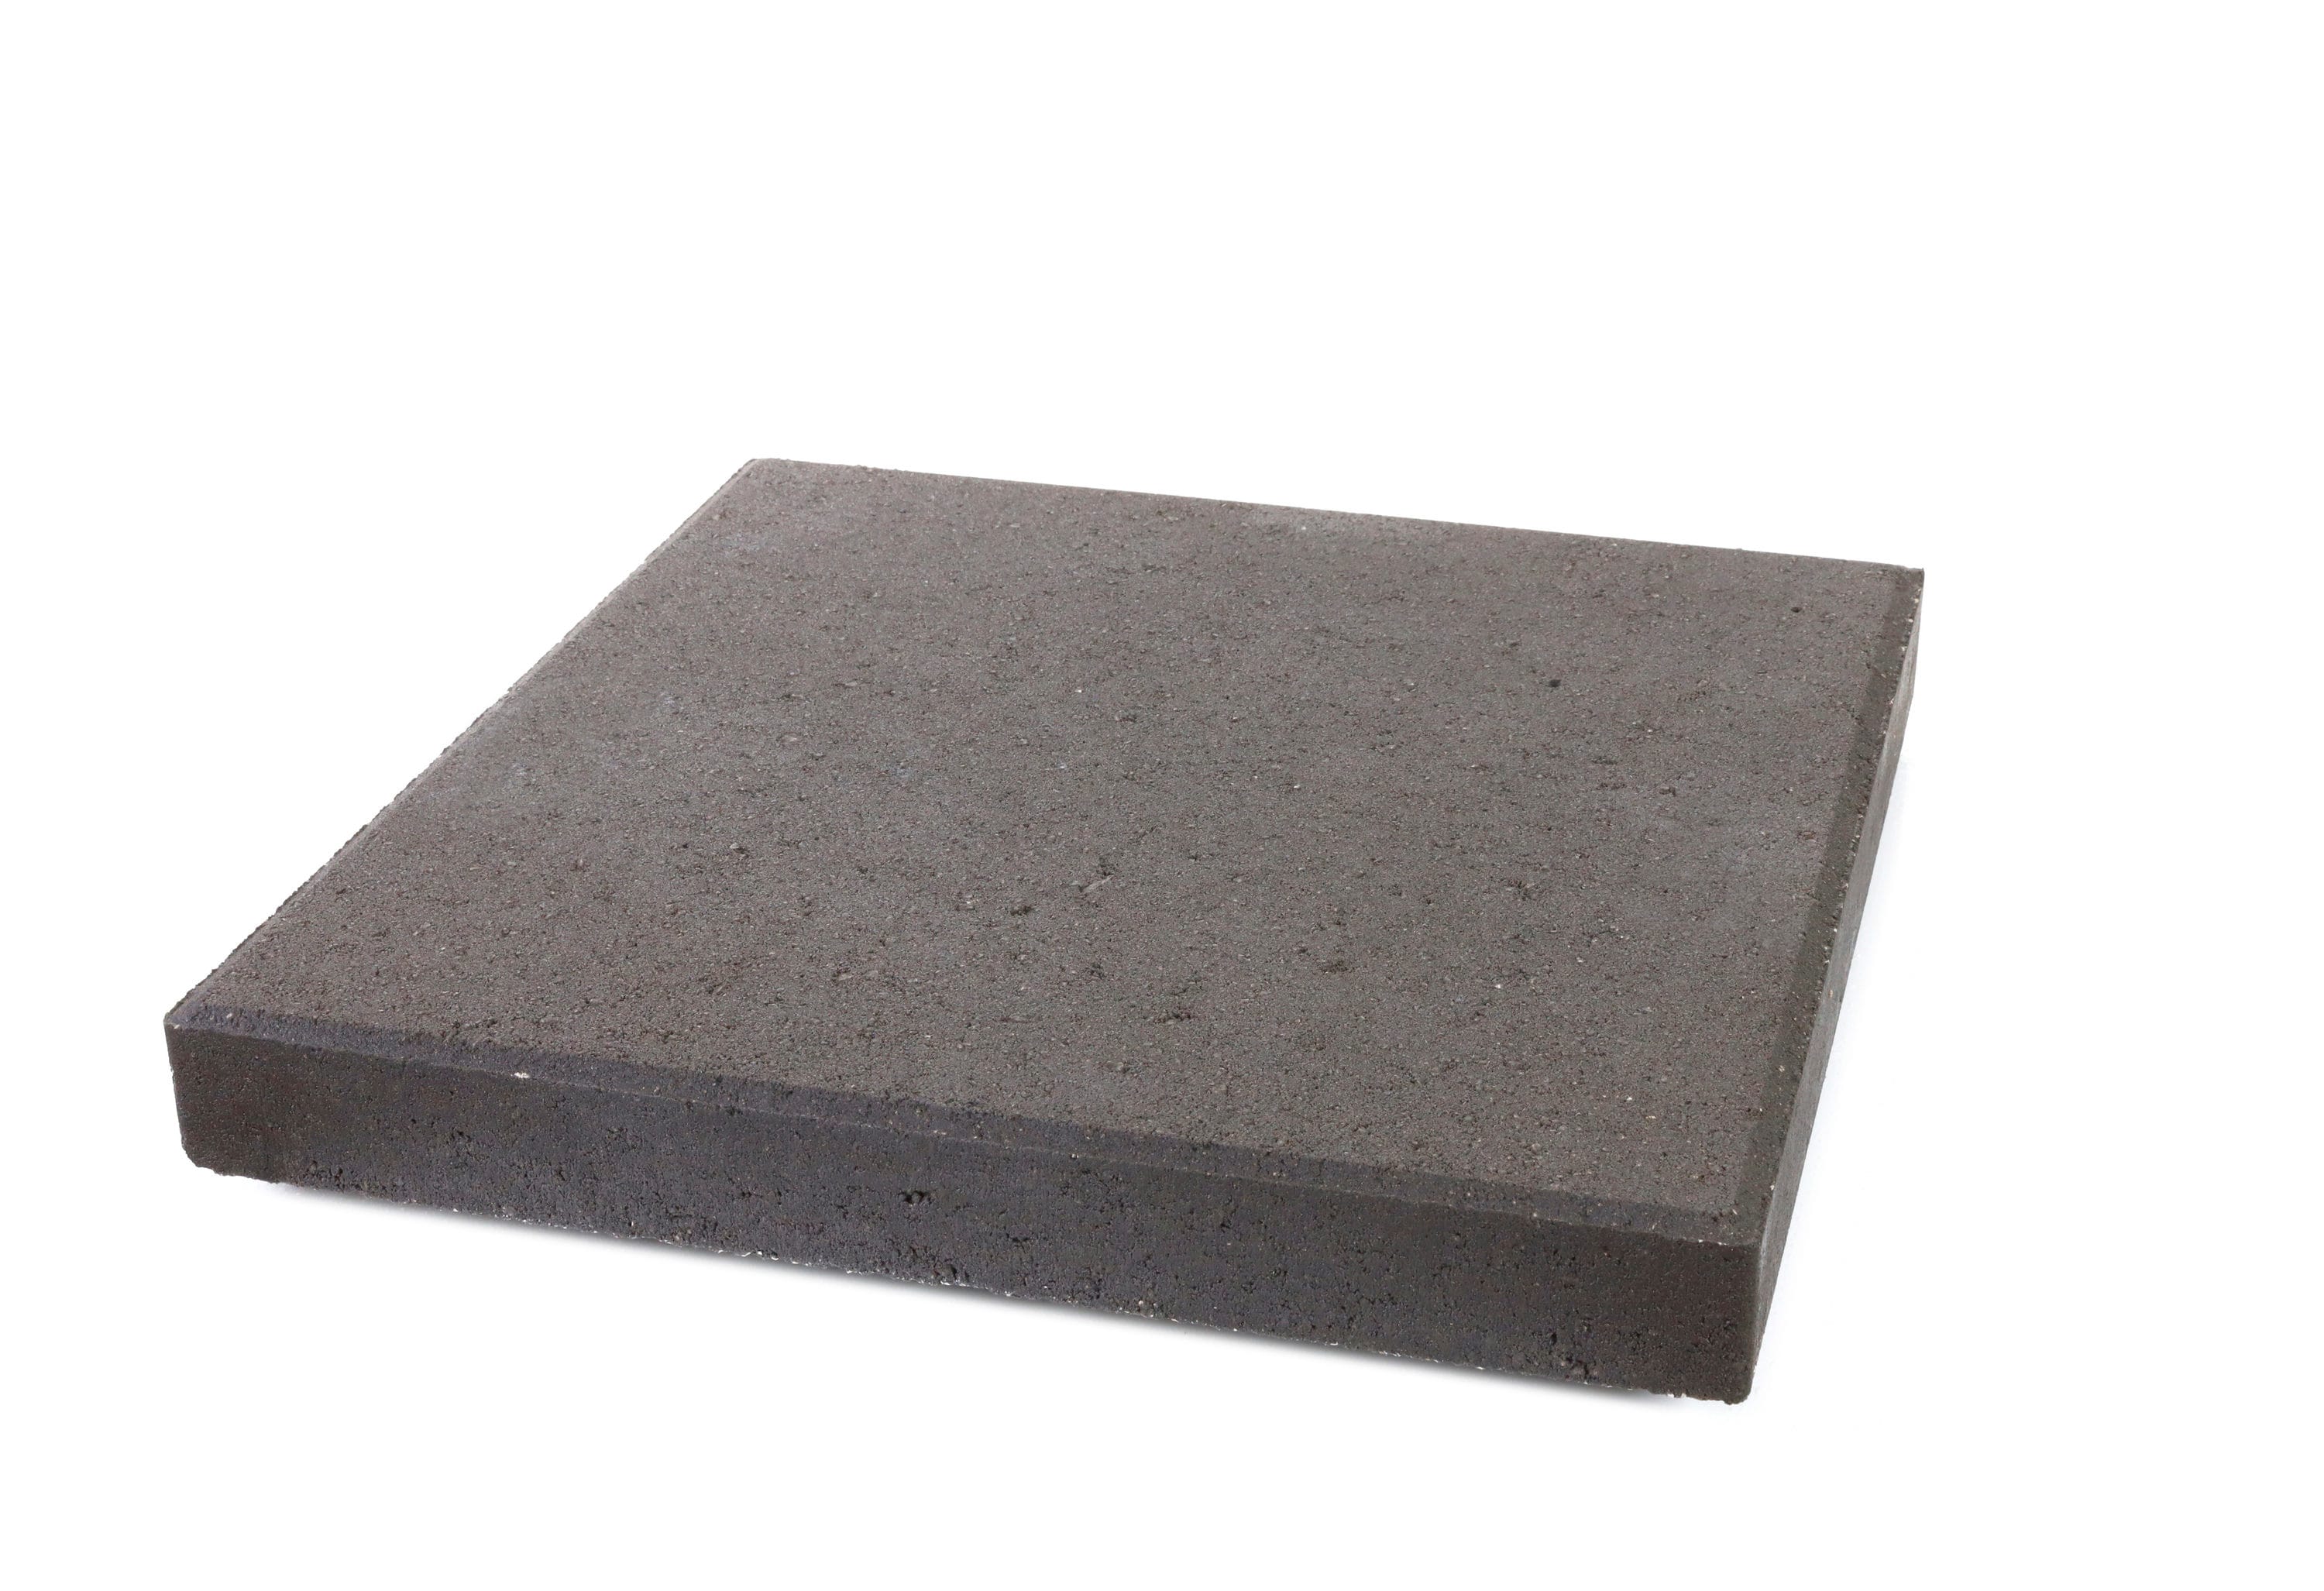 Pavestone 16x16 square L x 16-in x 2-in H Slate/Smooth Concrete Patio Stone in the Pavers & Stepping Stones at Lowes.com